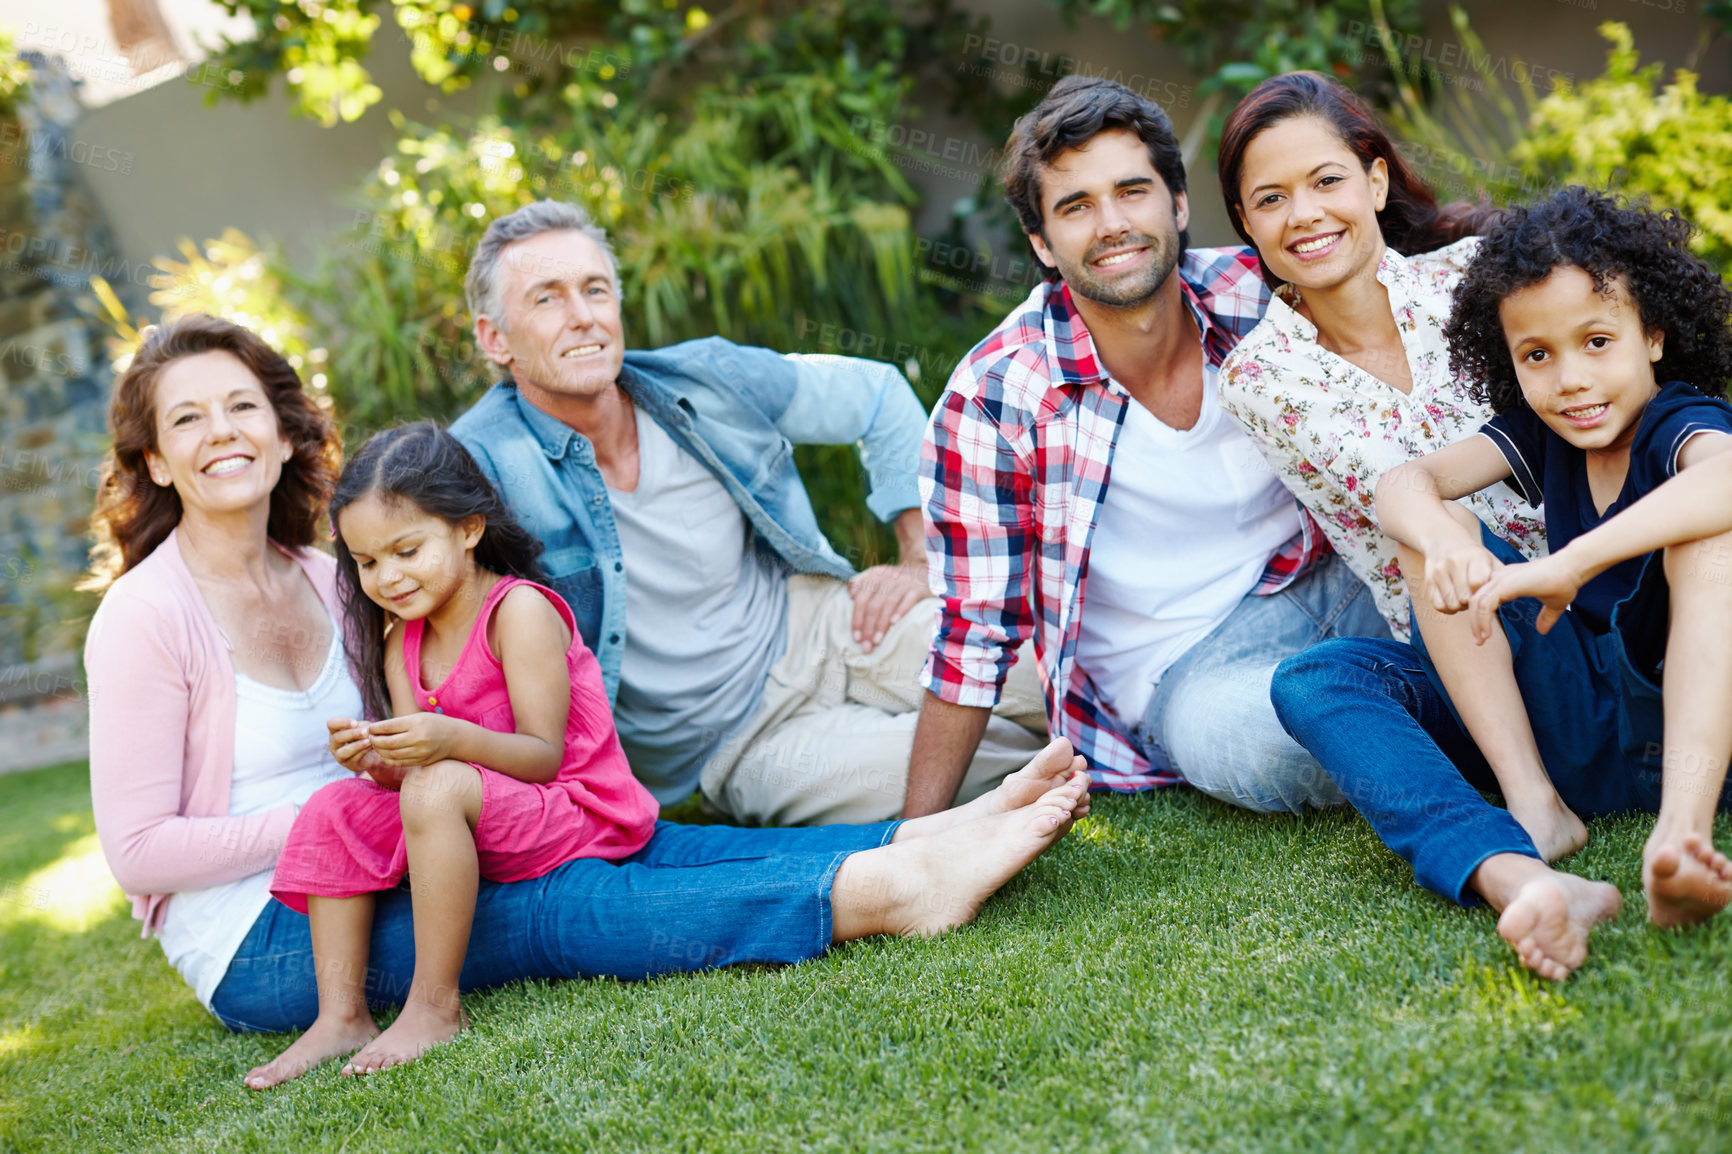 Buy stock photo Smile, nature and portrait of big family in park bonding together on outdoor vacation. Happy, interracial and children with grandparents and parents relaxing on grass in garden for holiday and love.